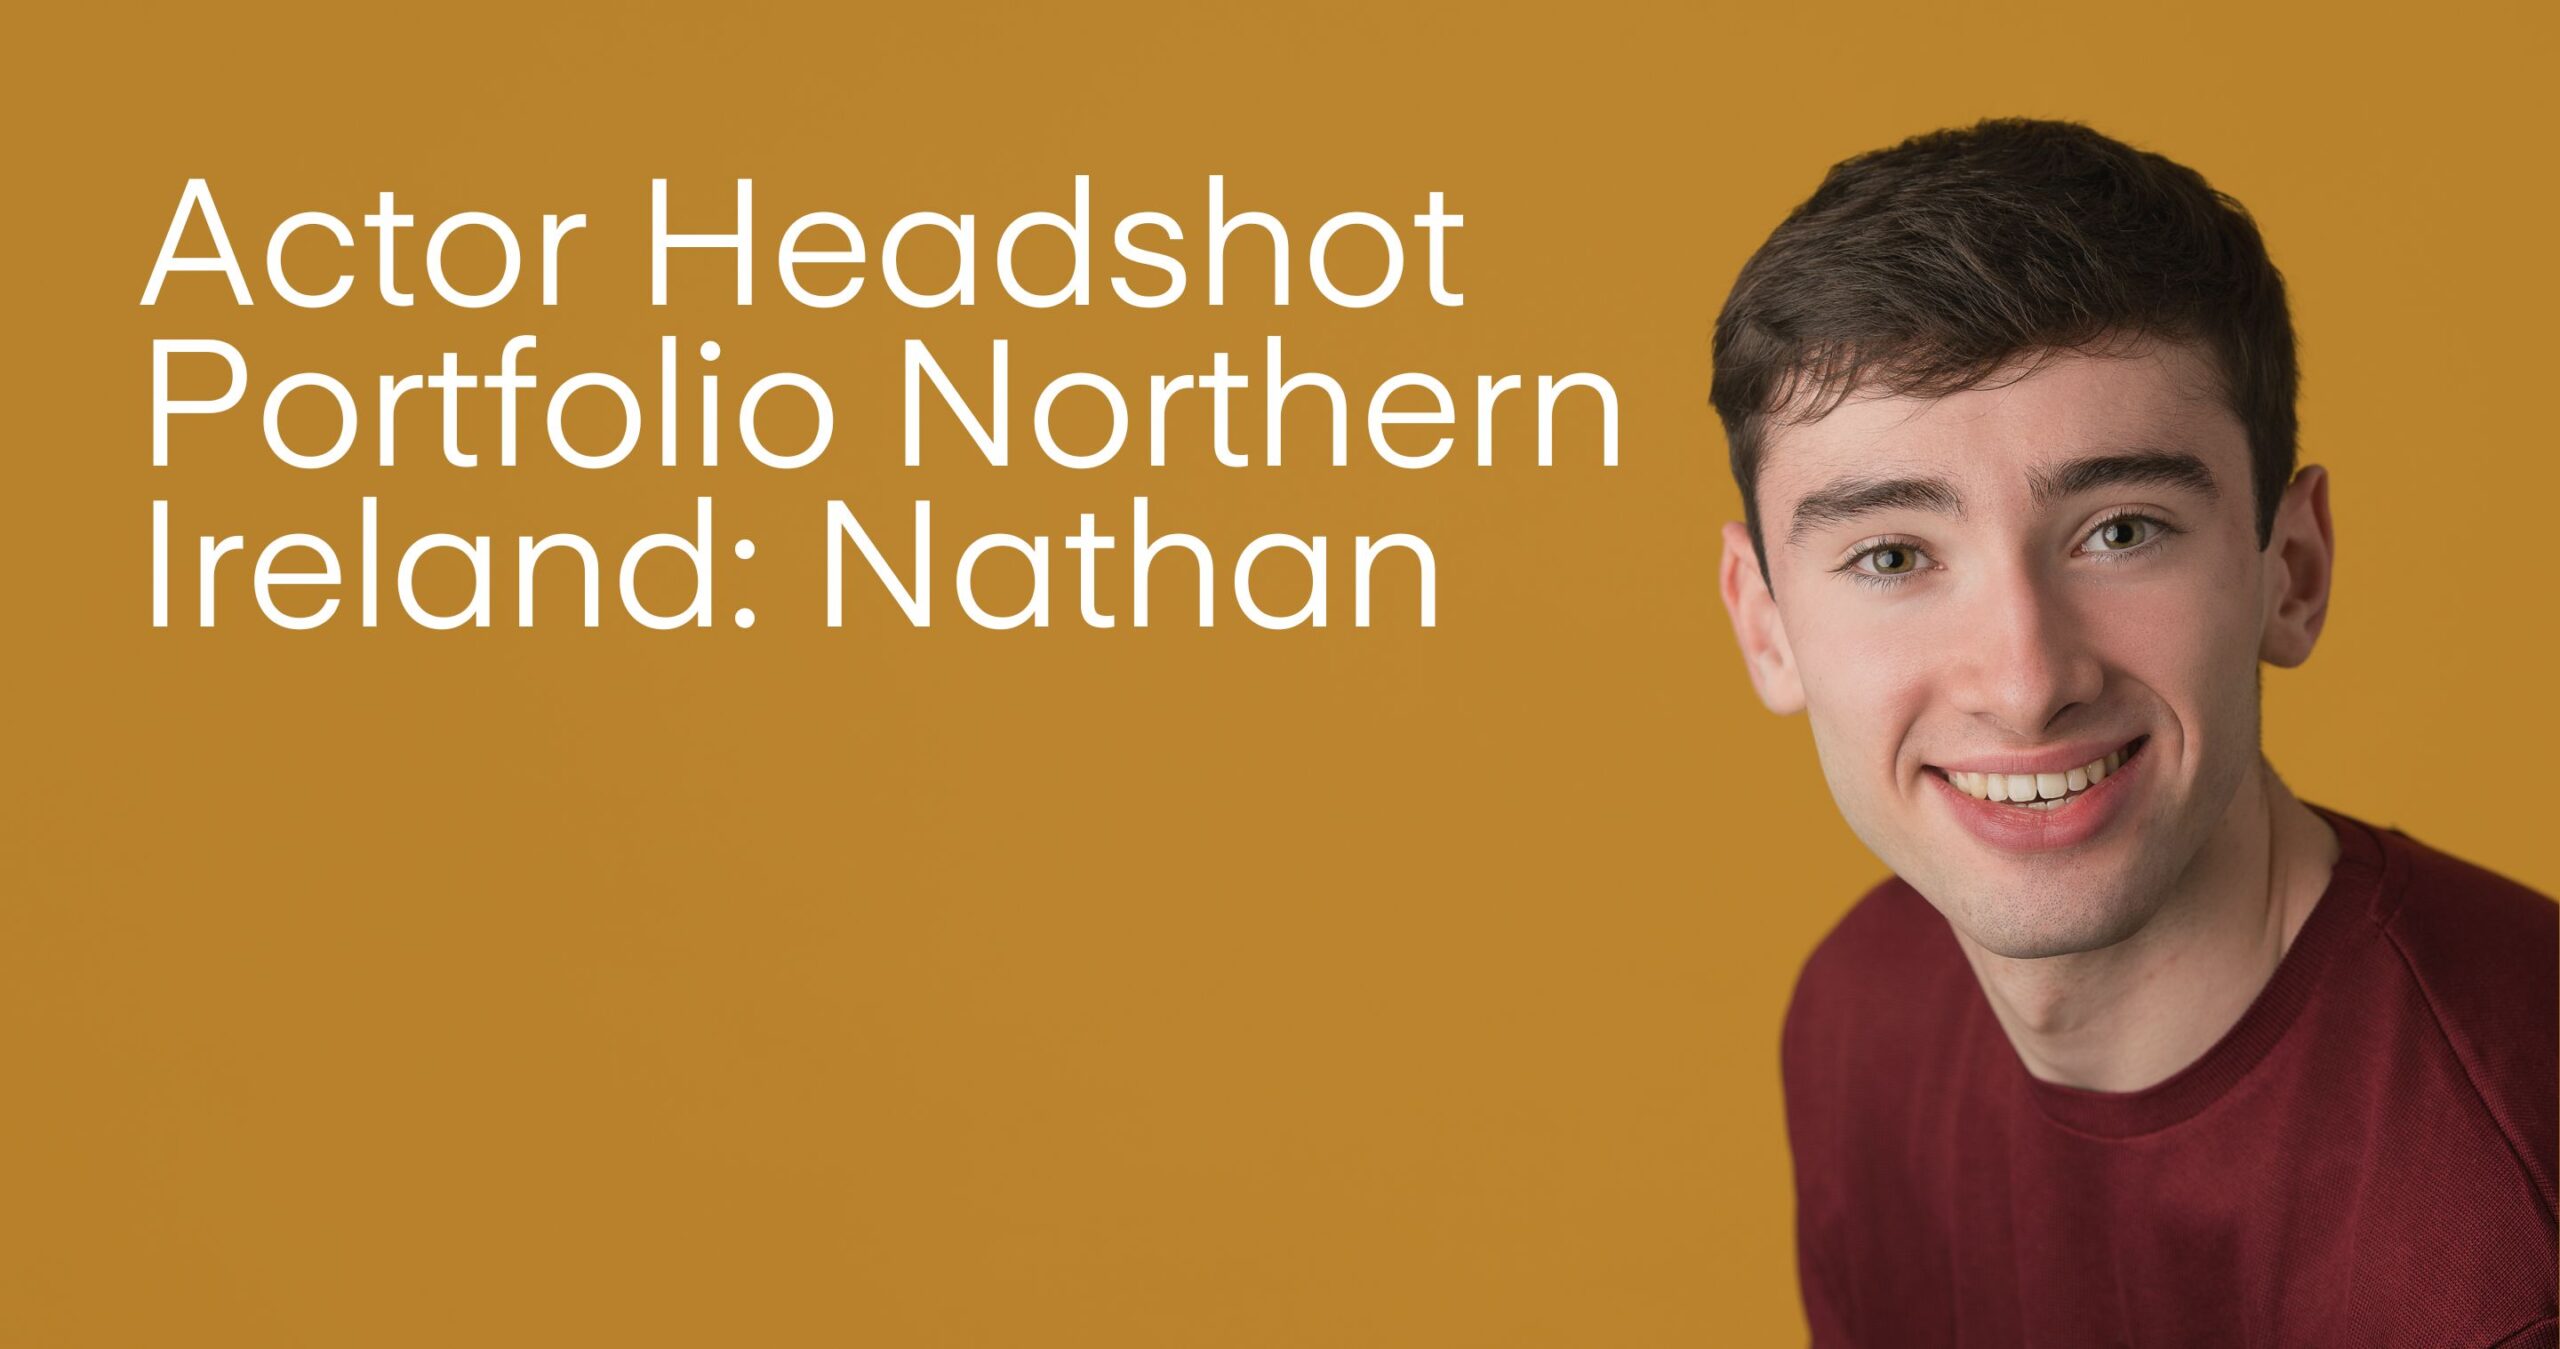 Professional headshot photograph taken by Northern Ireland's top headshot photographer in Belfast of a young actor straight on to camera wearing a red top on a mustard backdrop